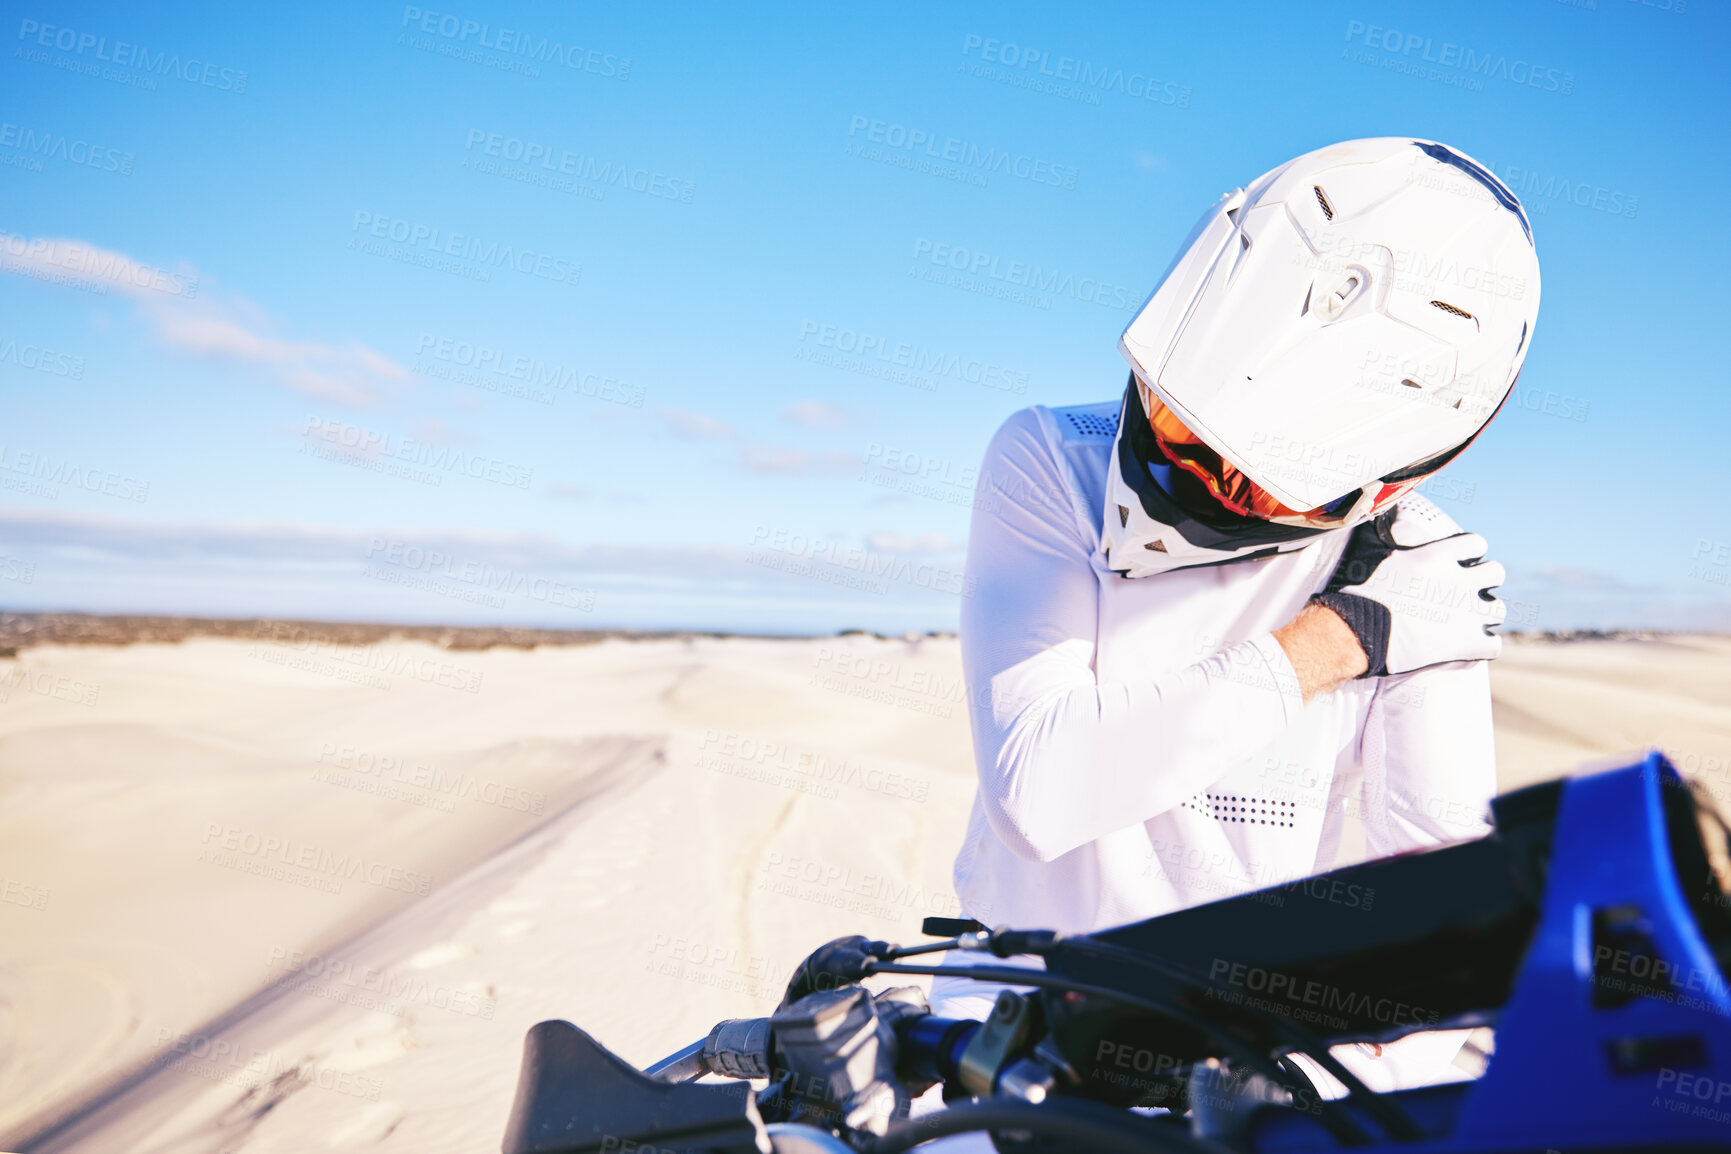 Buy stock photo Stretching, shoulder pain and person on motorbike with a strain or injury in desert ready for extreme sports. Performance, training and hurt rider in nature for exercise with motorcycle on dirt road